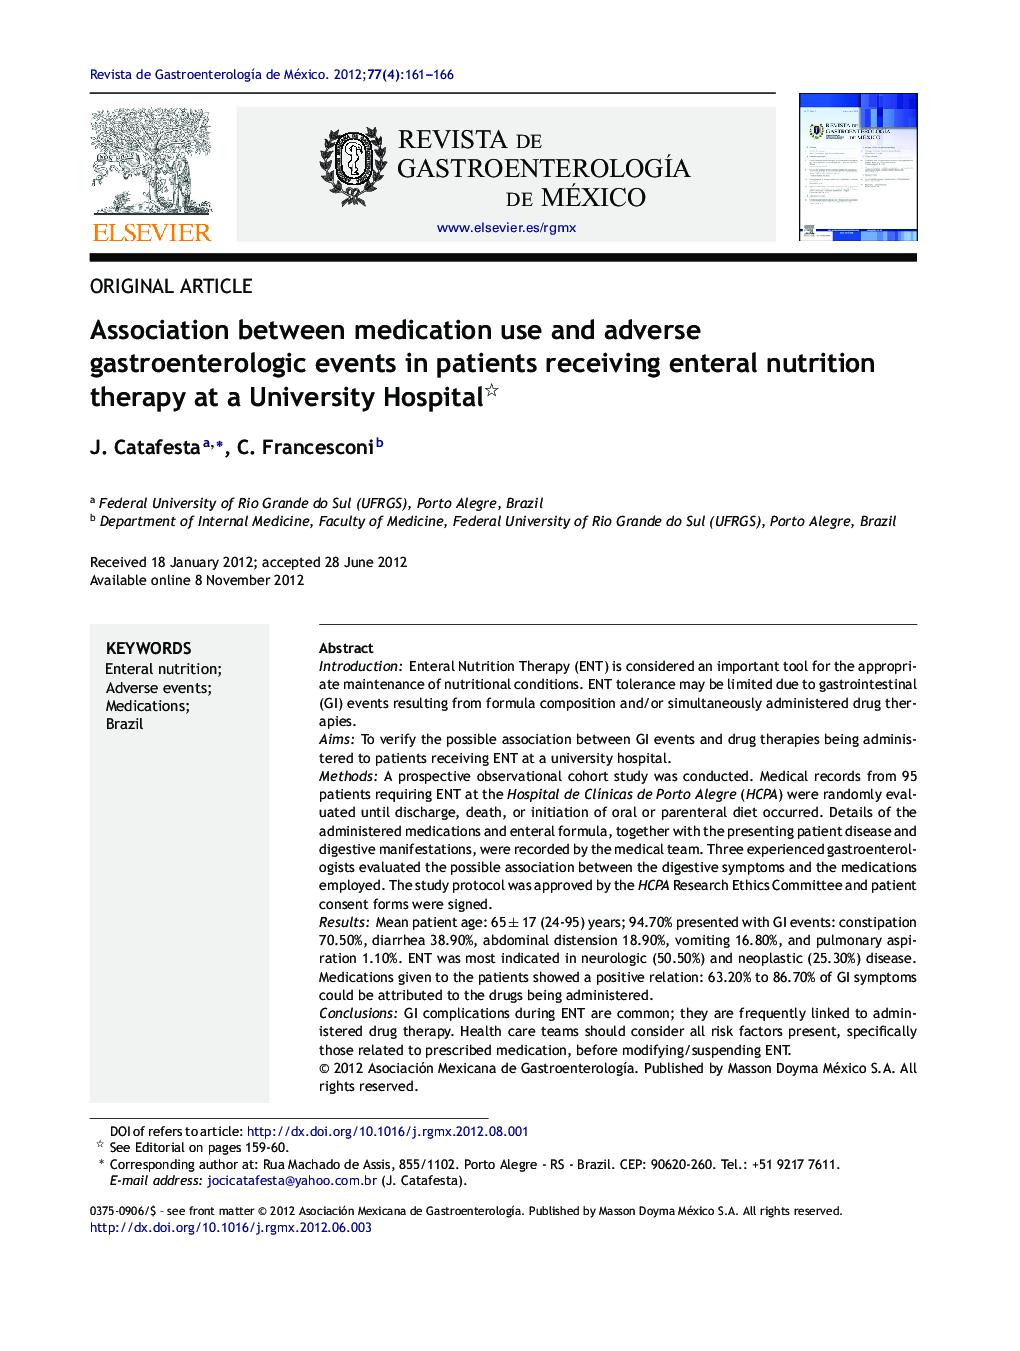 Association between medication use and adverse gastroenterologic events in patients receiving enteral nutrition therapy at a University Hospital 